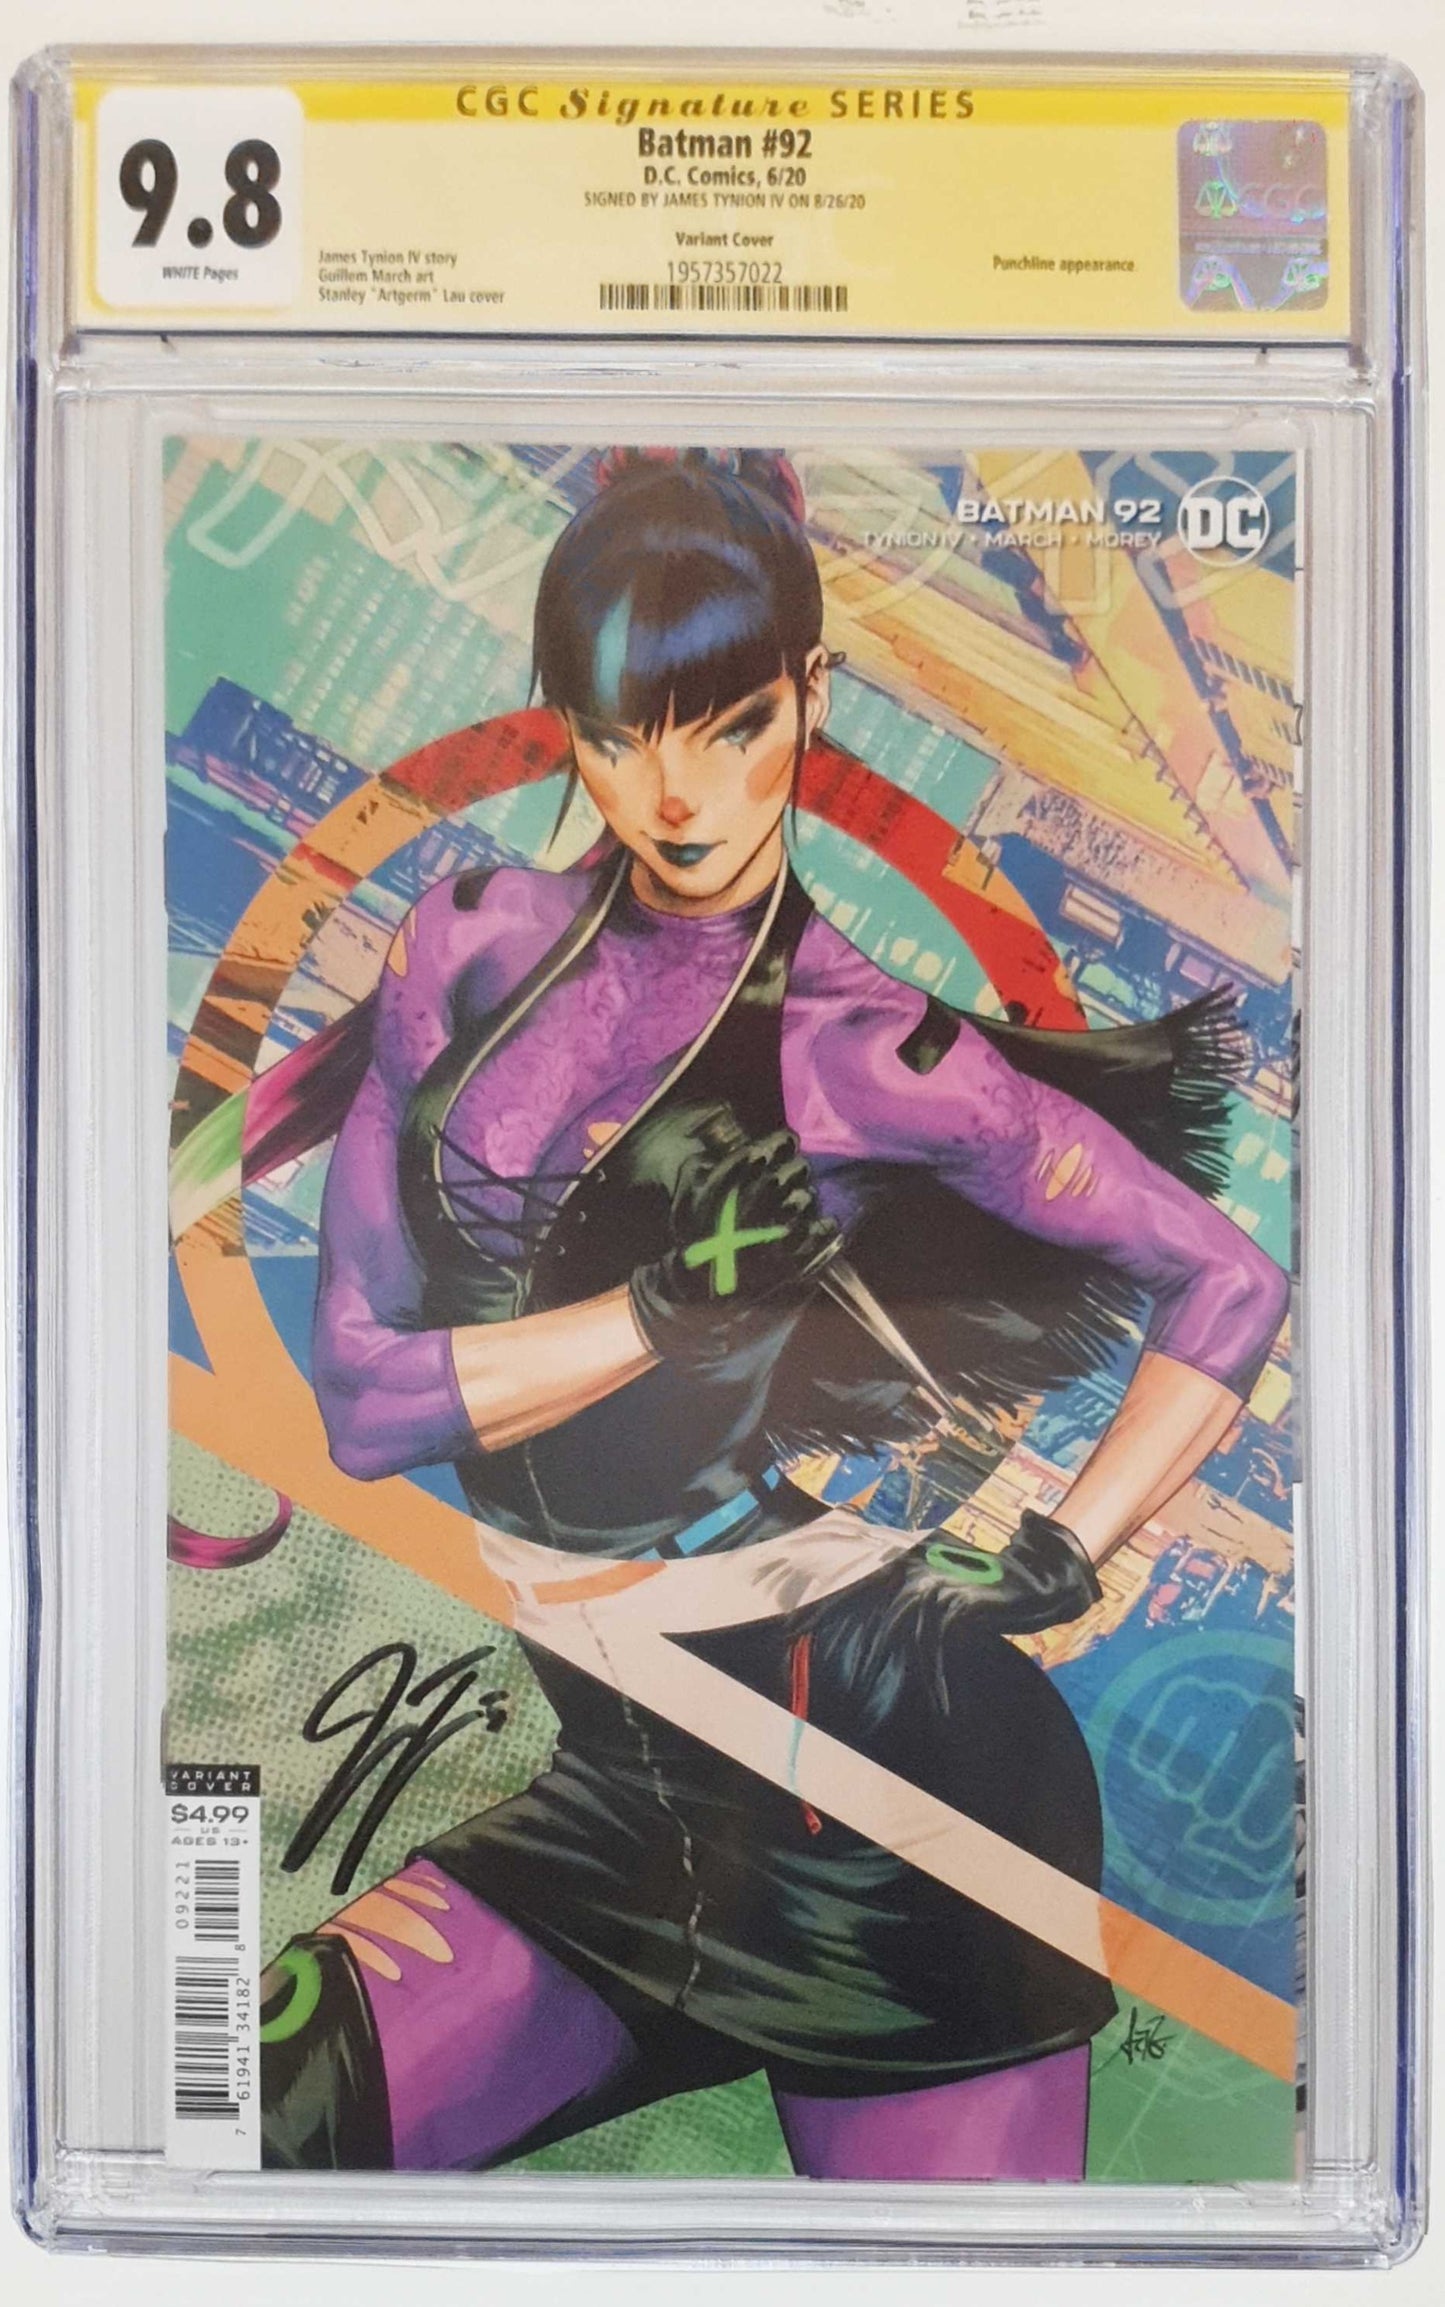 BATMAN #92 CARD STOCK ARTGERM VARIANT VAR ED - 1ST SOLO PUNCHLINE COVER - CGC SS 9.8 SIGNED BY JAMES TYNION IV